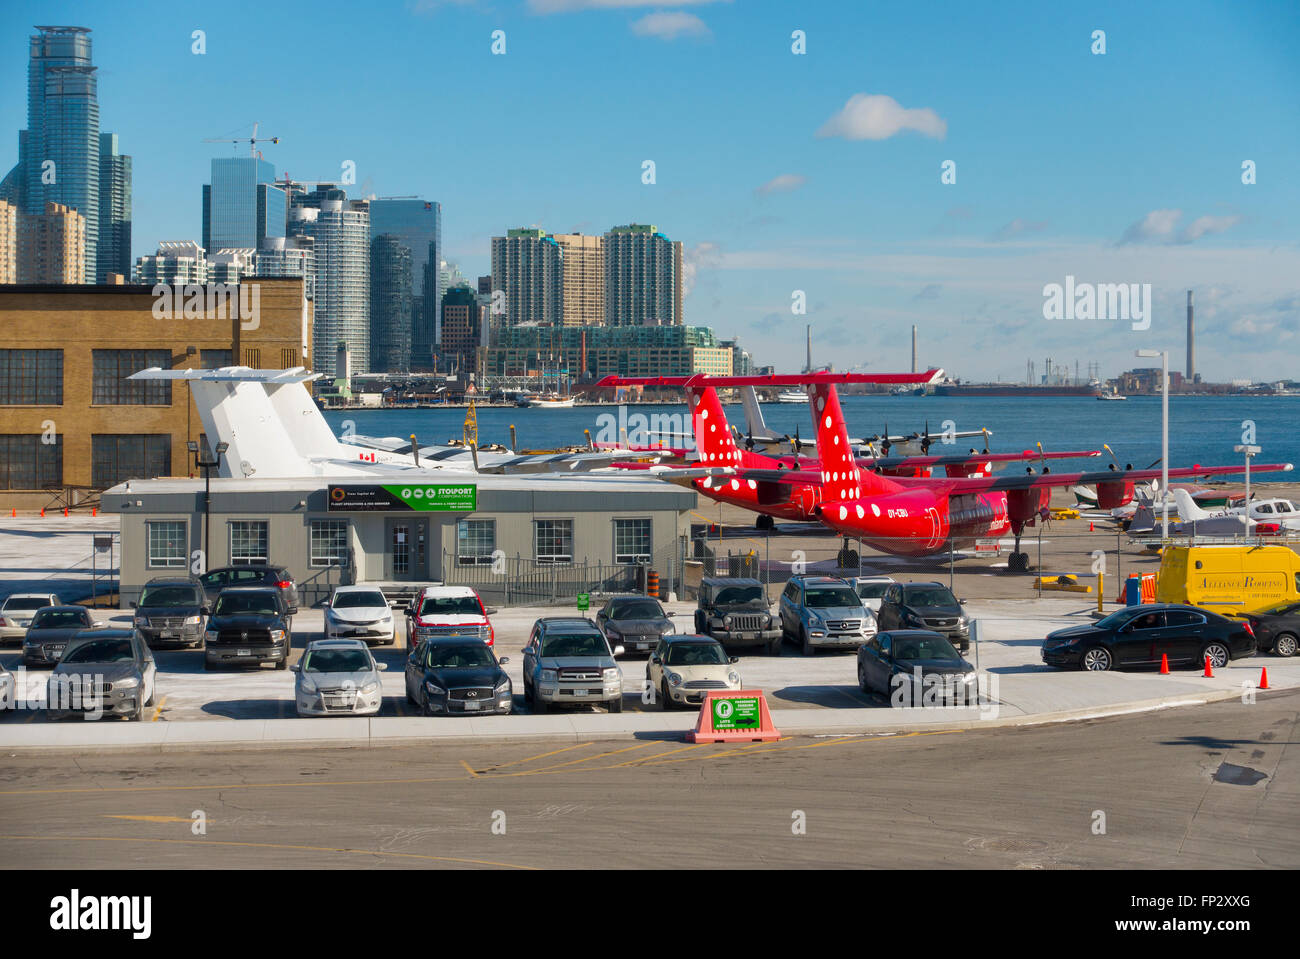 Planes at the Billy Bishop Toronto City Airport overlooking the parking lot. Toronto, Ontario, Canada. Stock Photo